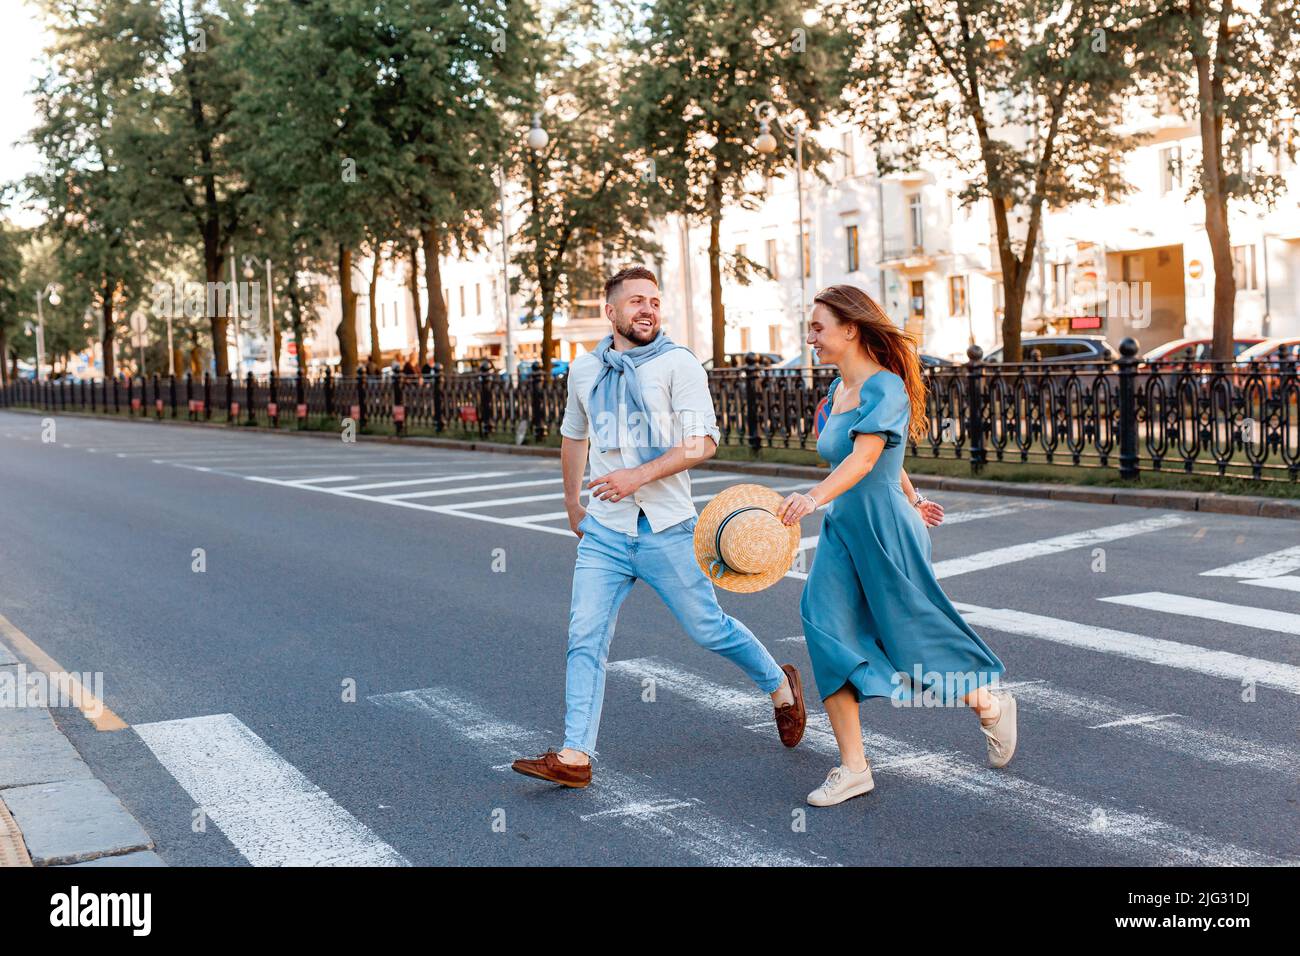 Romantic couple spending time together in the city while walking on a crosswalk. Stock Photo